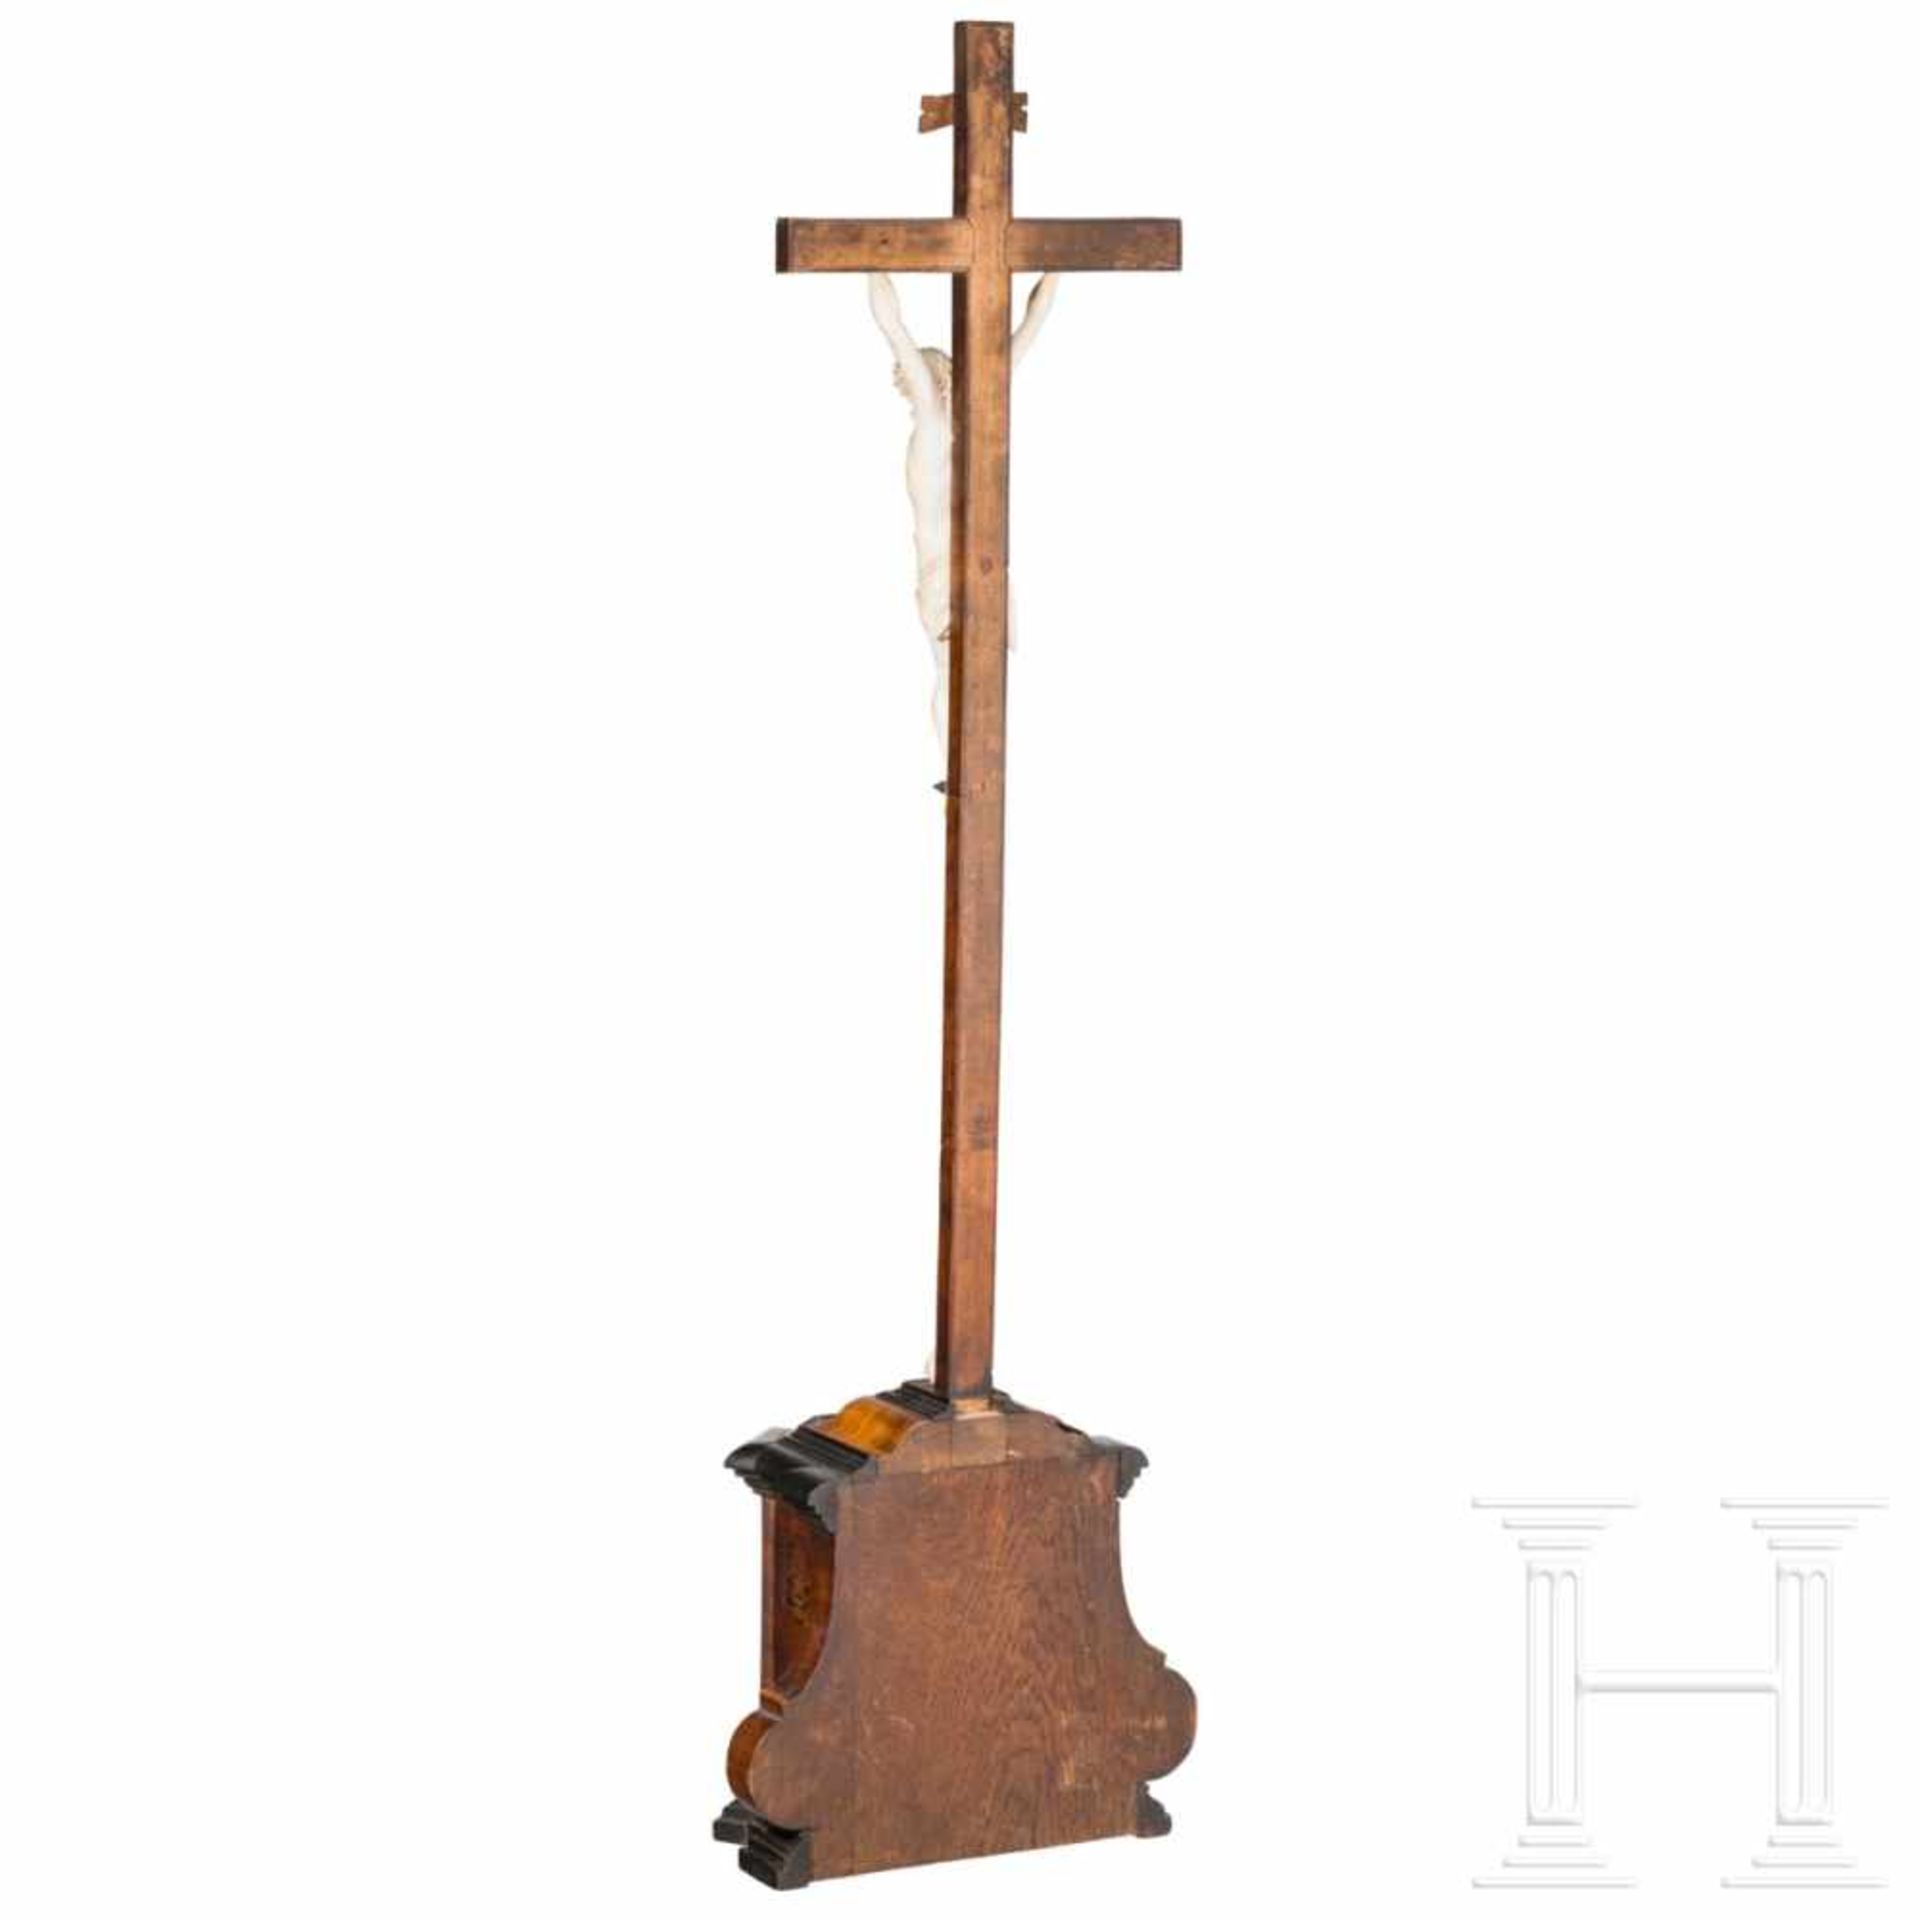 A South German Baroque crucifix, 17th centuryIvory and softwood body, partially carved and - Bild 3 aus 6